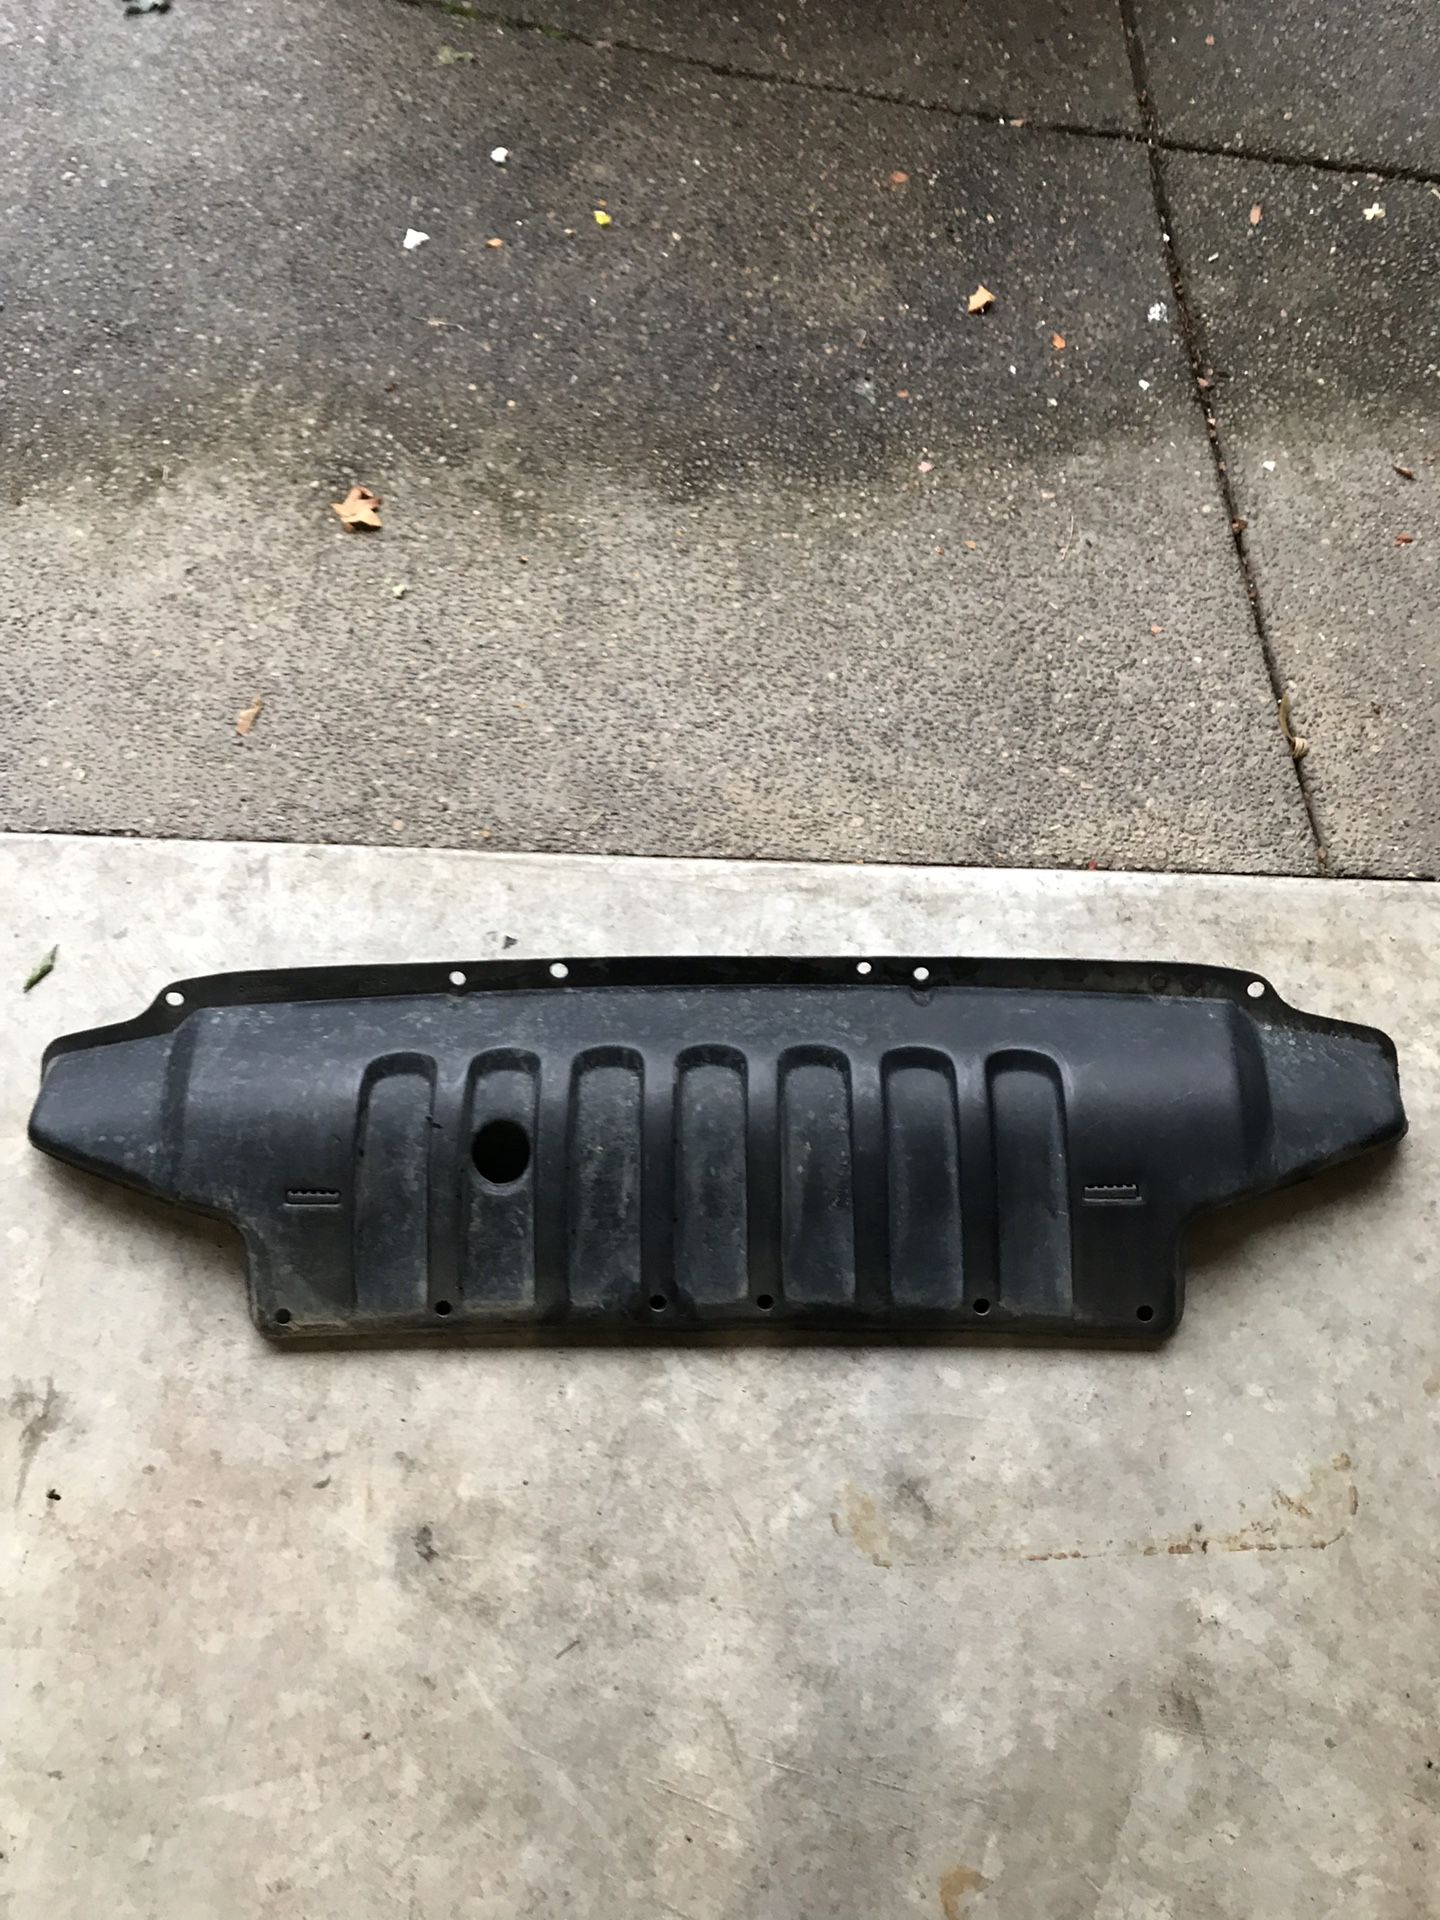 Jeep Wrangler Rubicon stock Oem front skid plate